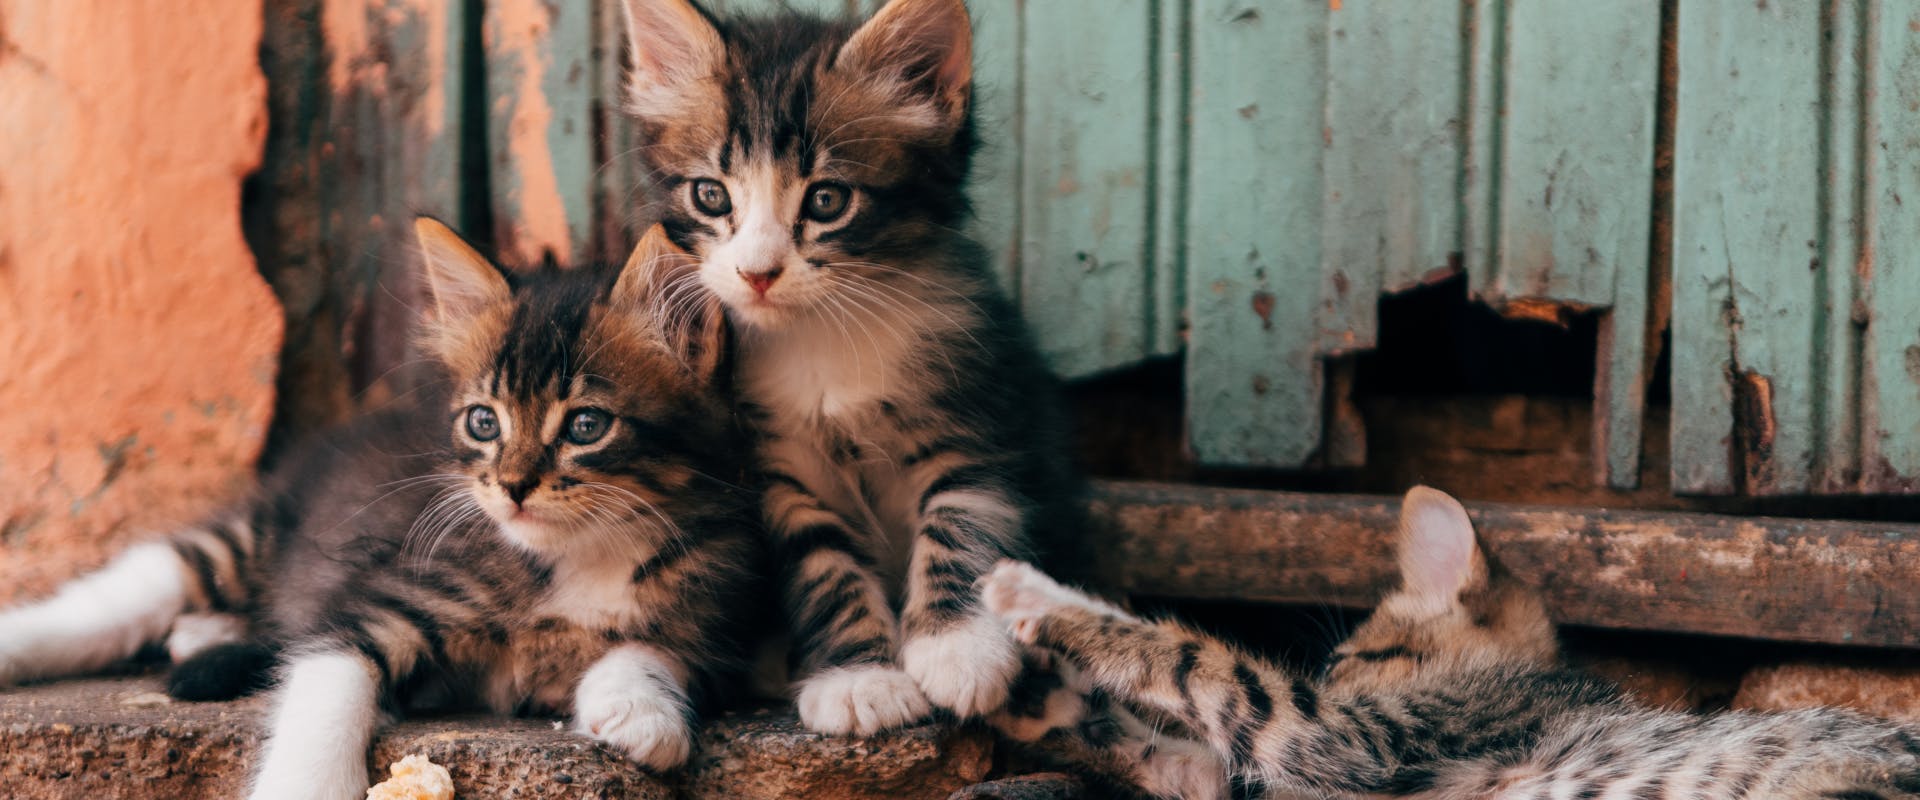 three kittens outside a wooden door lounging on a concrete step